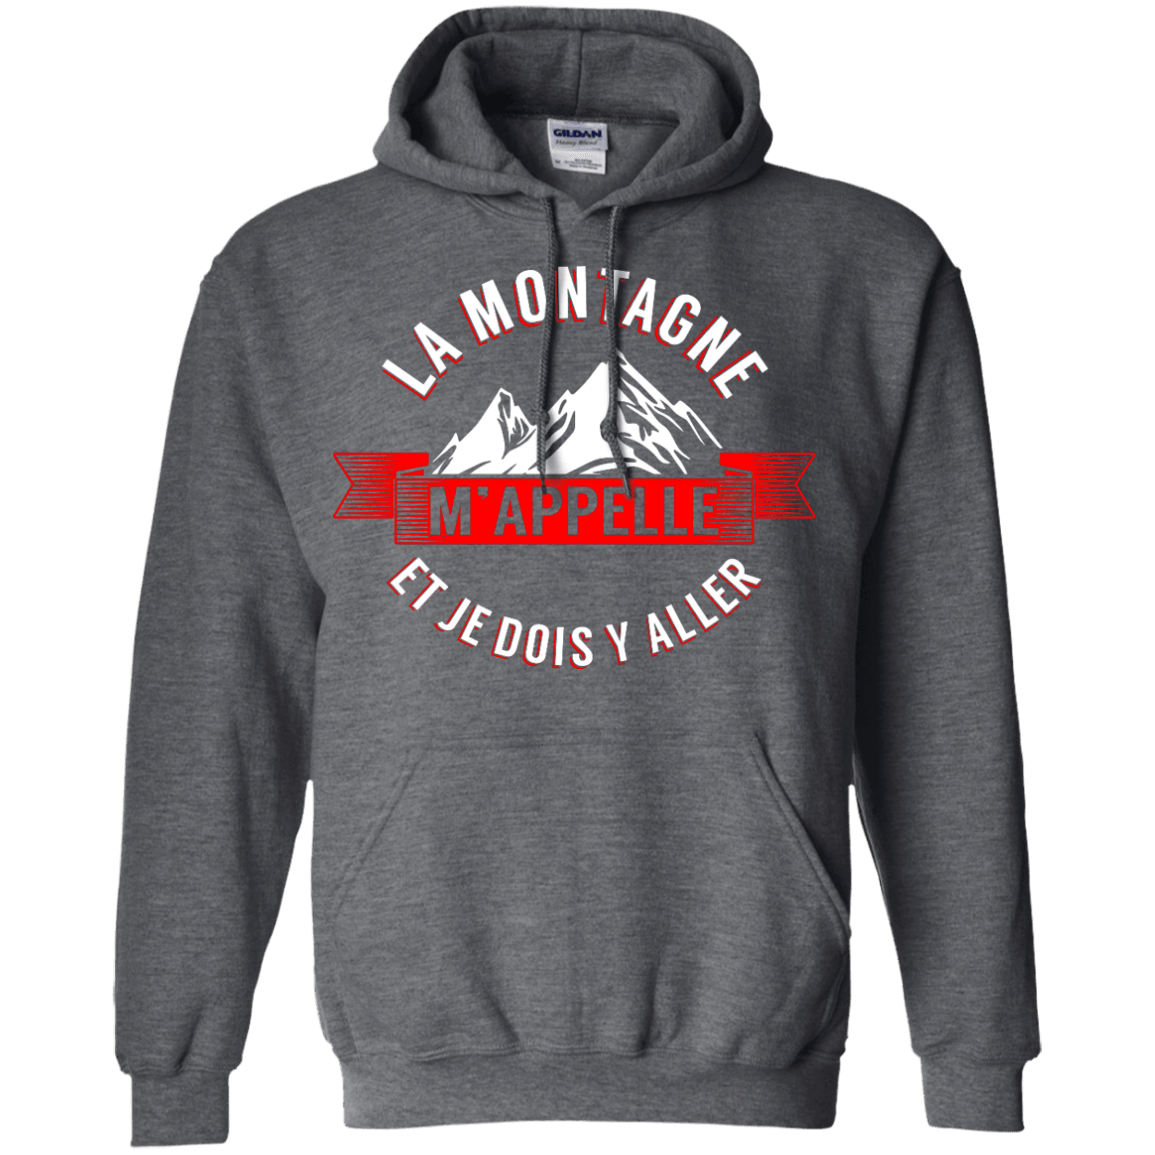 Mountains Are Calling - French Hoodies - Powderaddicts